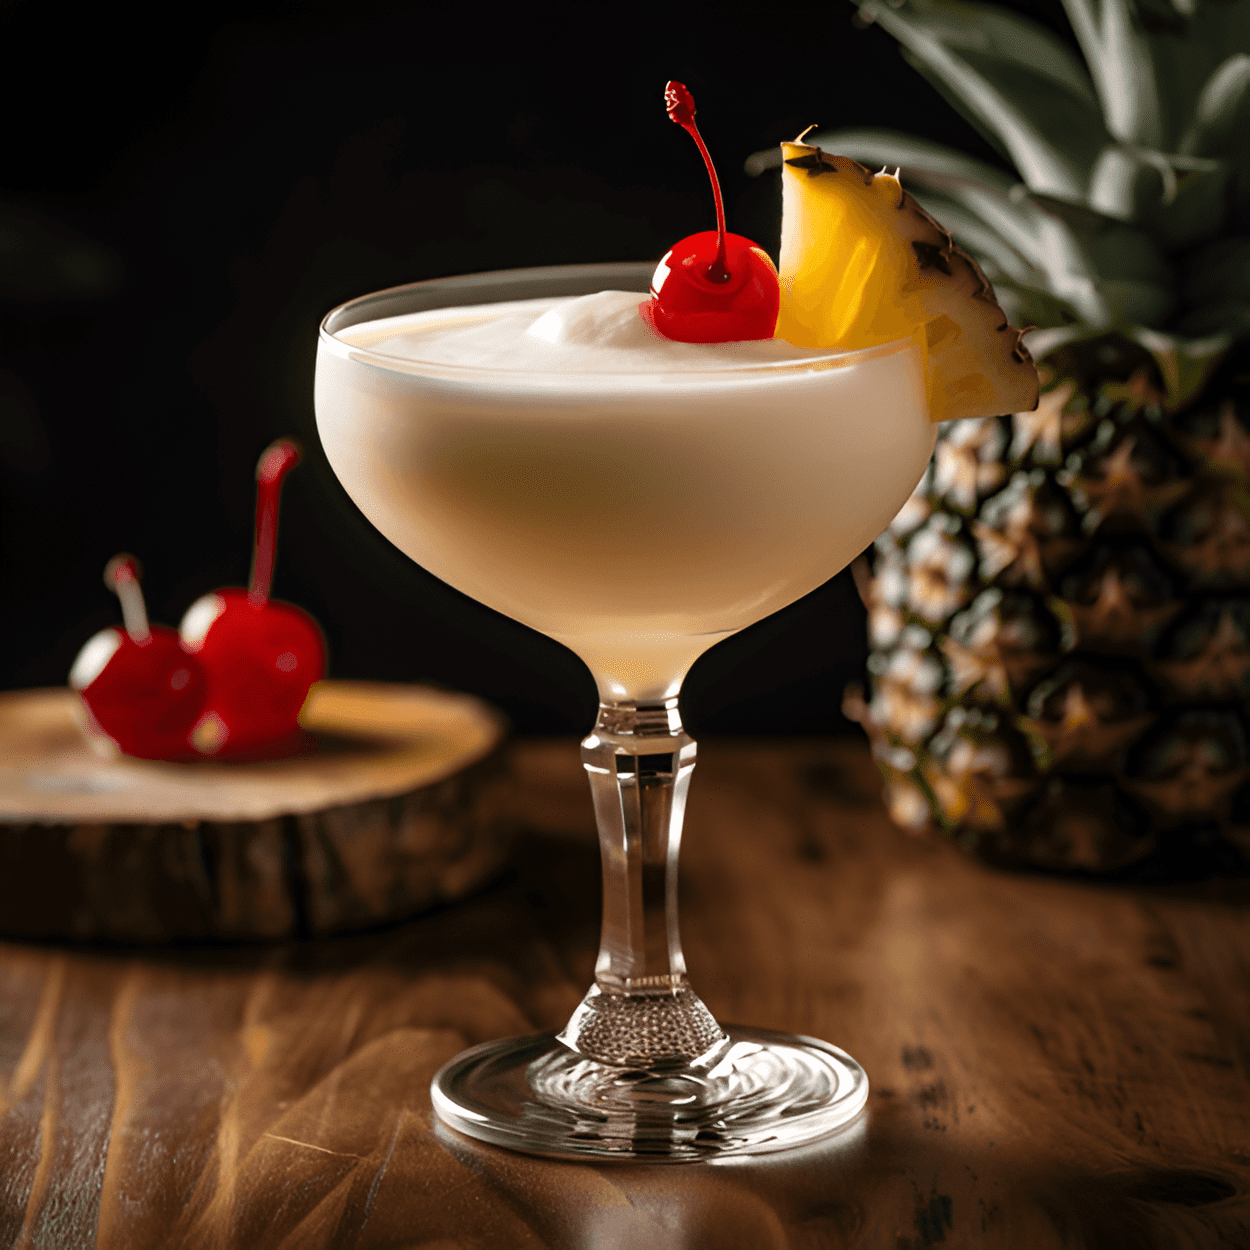 Chasers Delight Cocktail Recipe - The Chasers Delight is a sweet and fruity cocktail with a strong kick. It has a smooth, creamy texture with a hint of citrus and a strong rum aftertaste. The sweetness of the pineapple and the tartness of the lime balance out the strong taste of the rum, making it a delightful and refreshing cocktail.